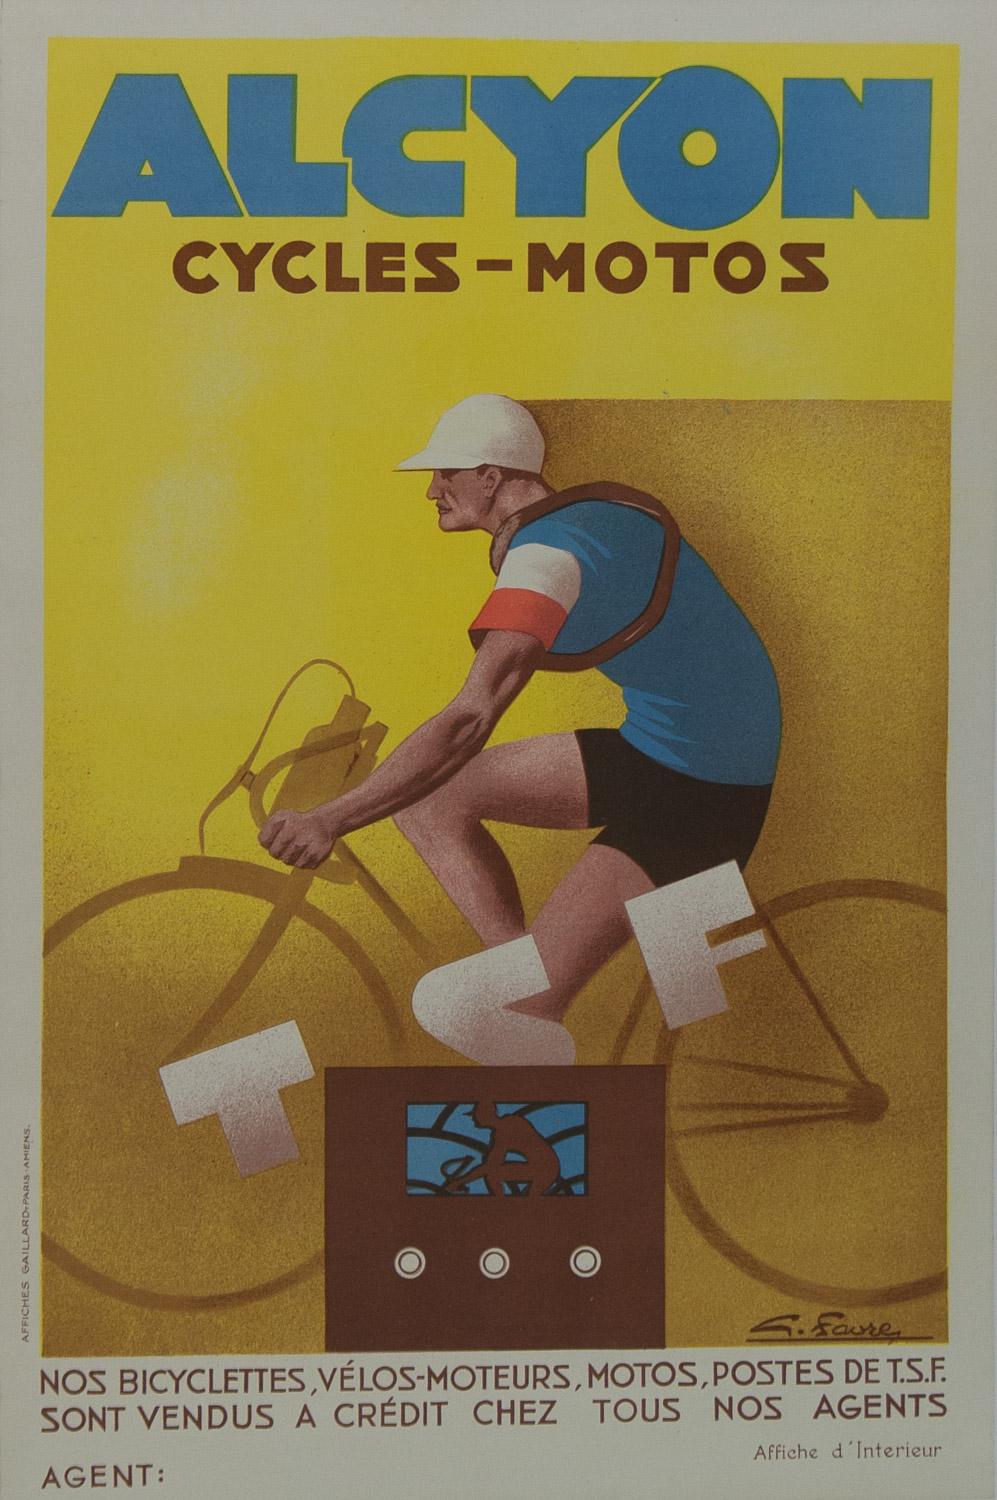 Alcyon Cycles-Moto Vintage Poster